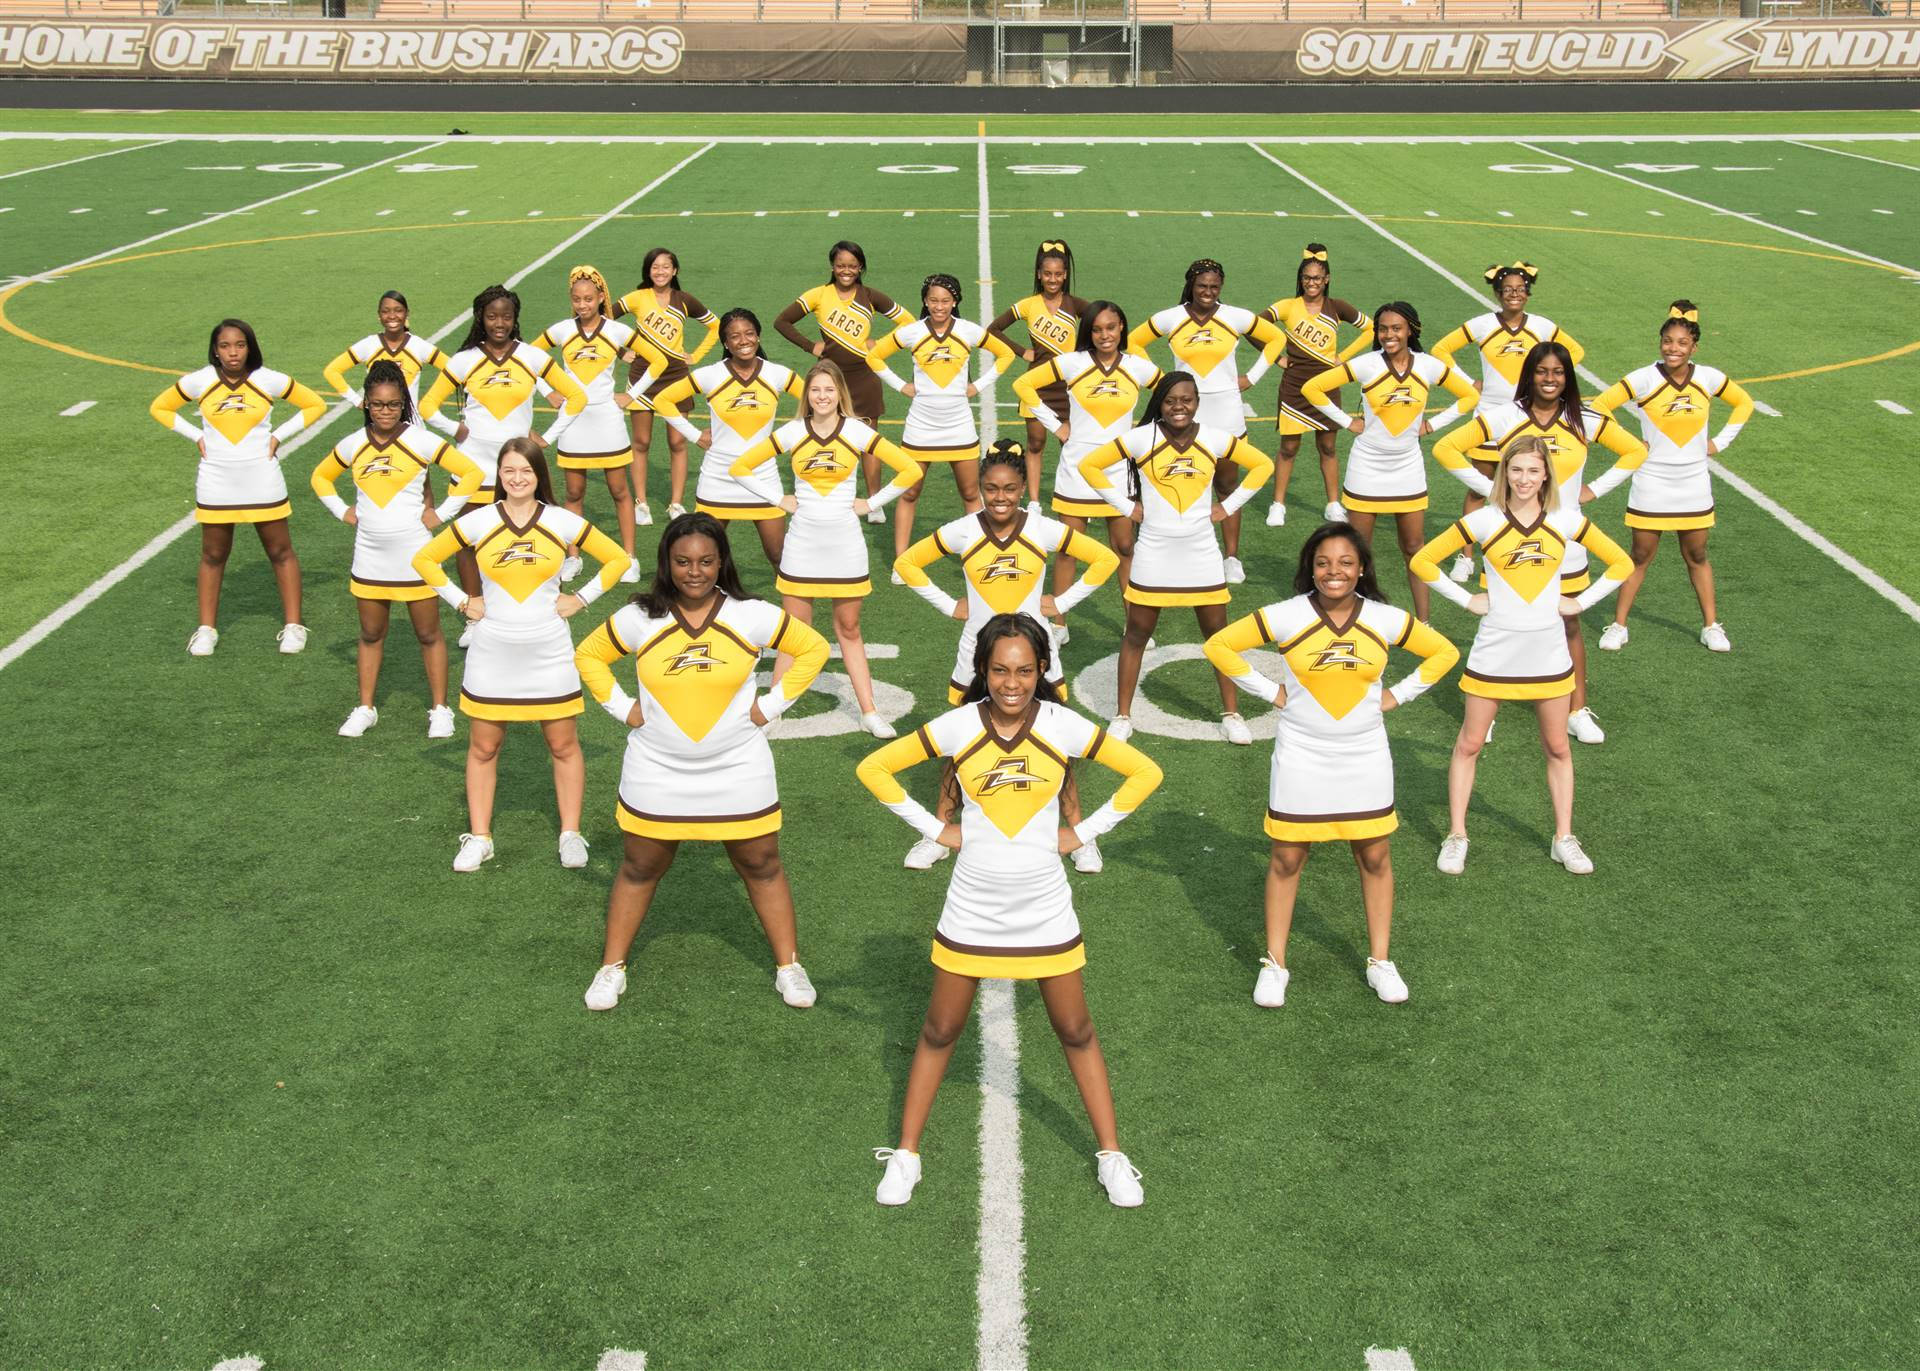 Free Cheerleading Background, Cheerleading Background s for FREE